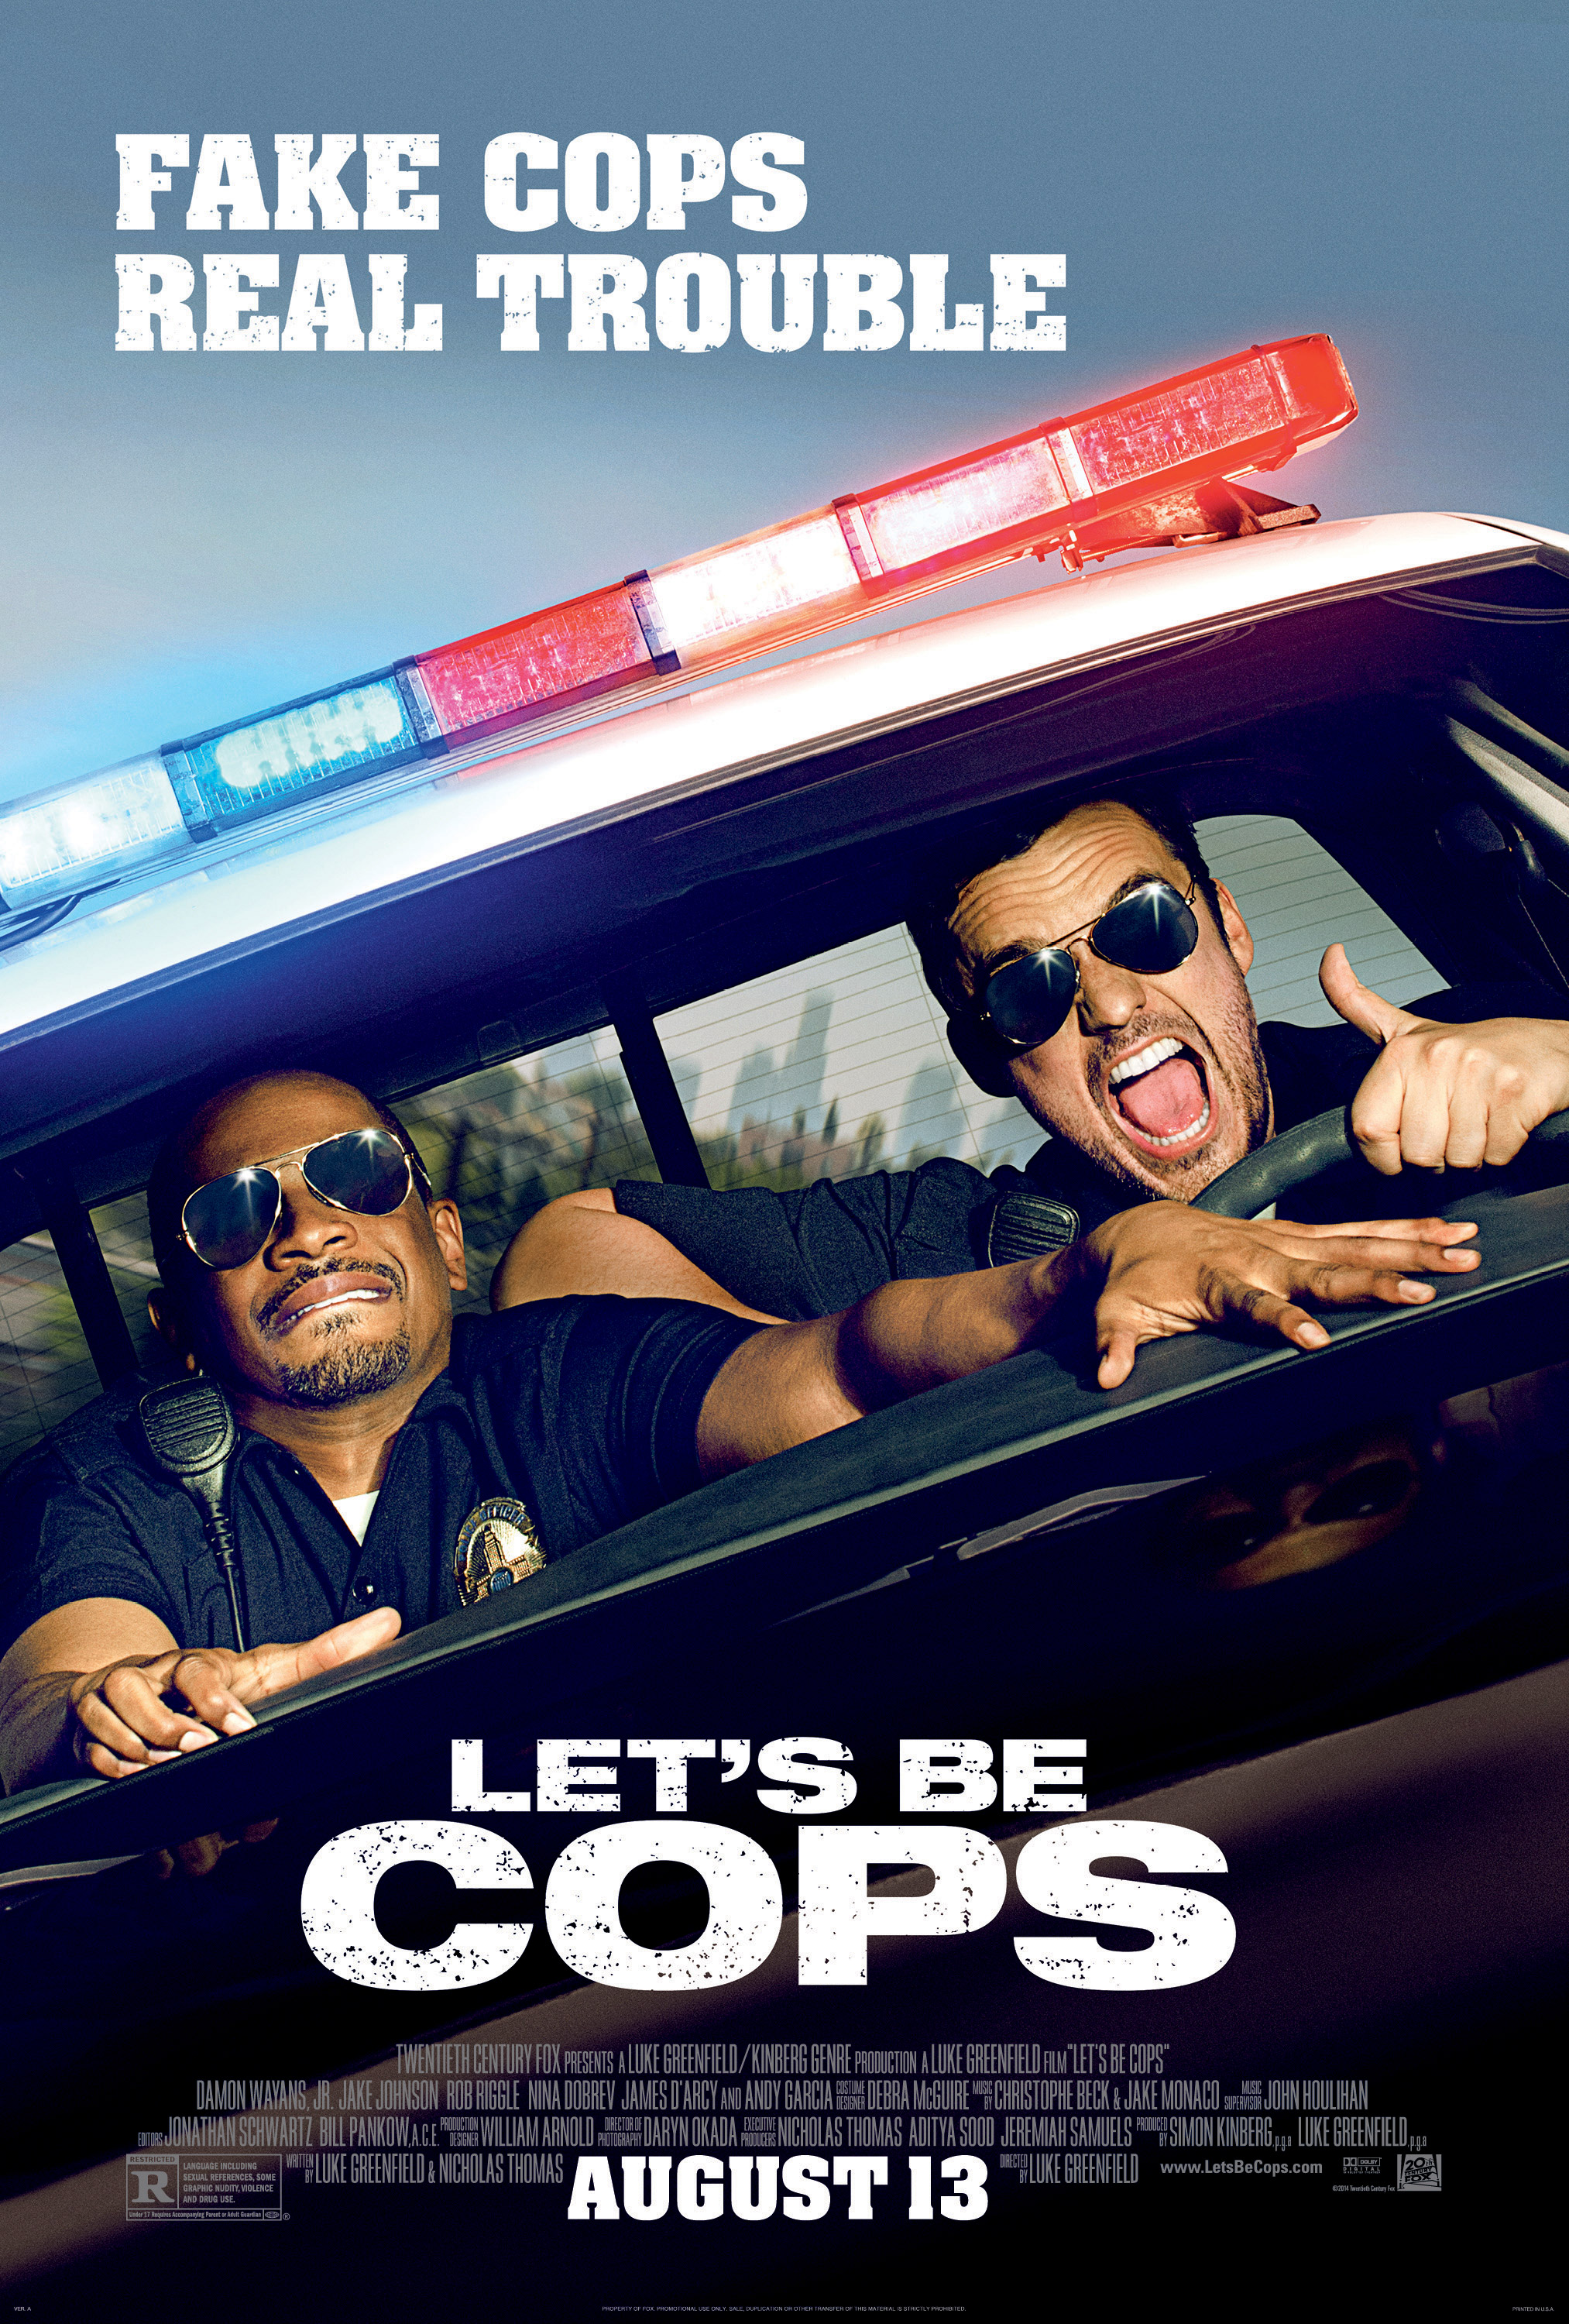 Allied Media presents: Let's Be Cops Monday | August 11th 7:00 pmFor a chance